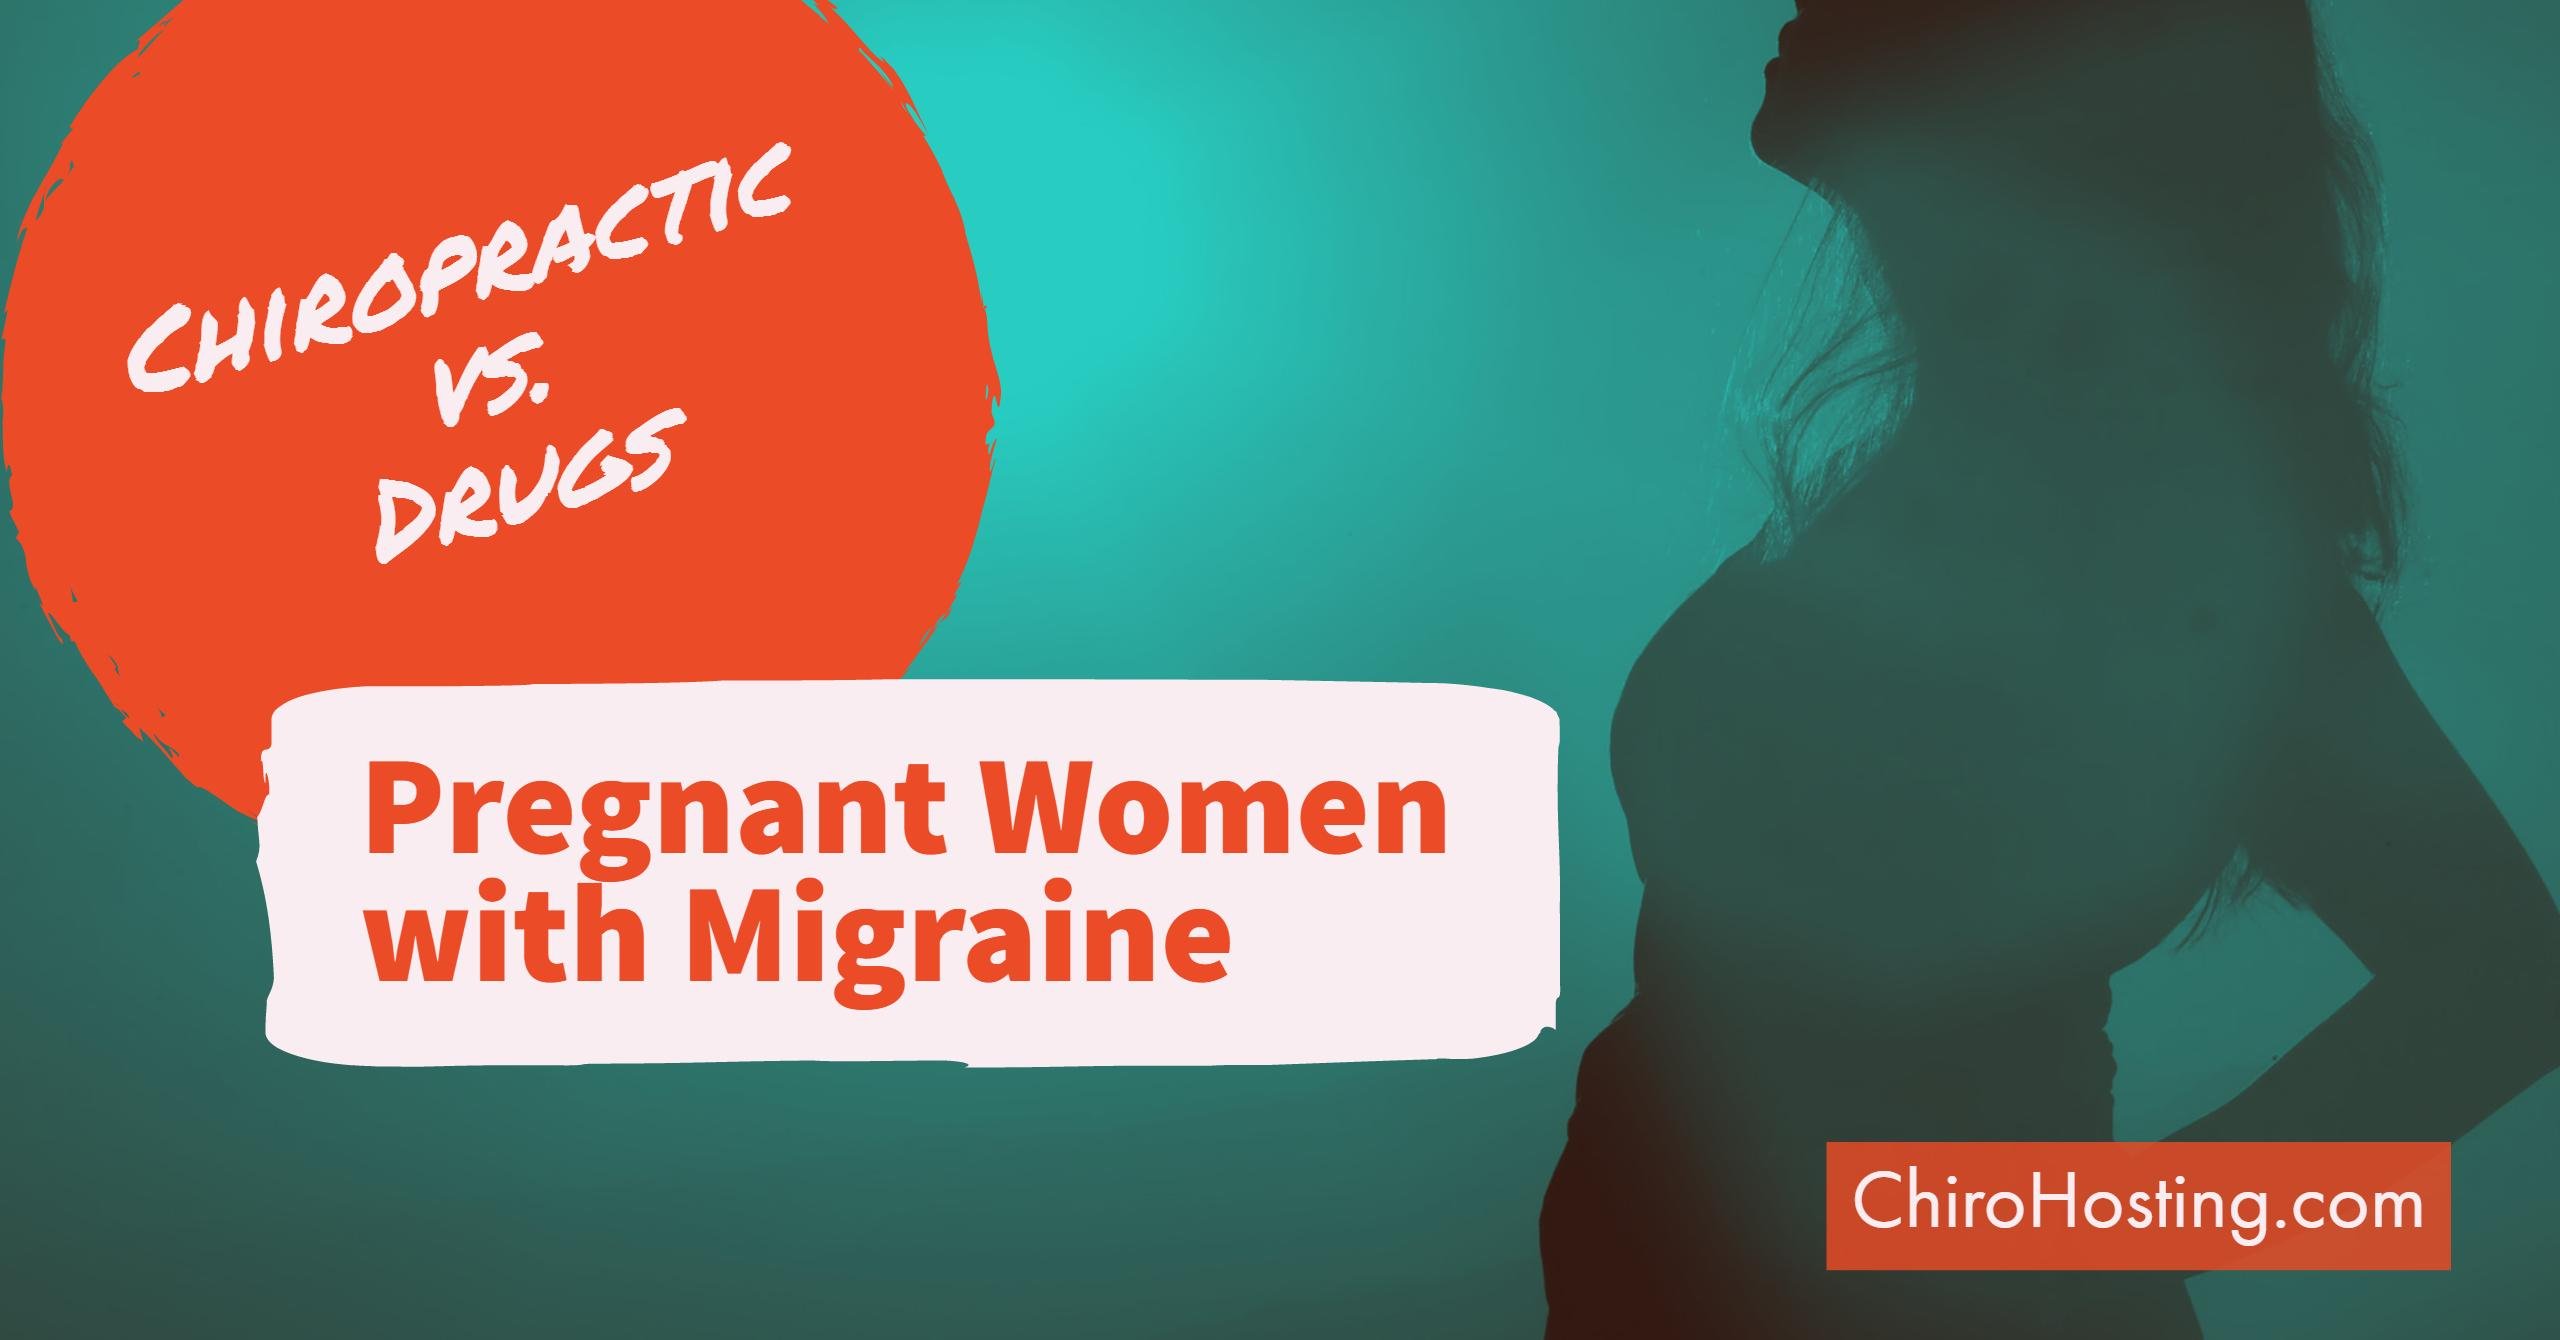 Chiropractic vs. Drugs for Pregnant Women with Migraine